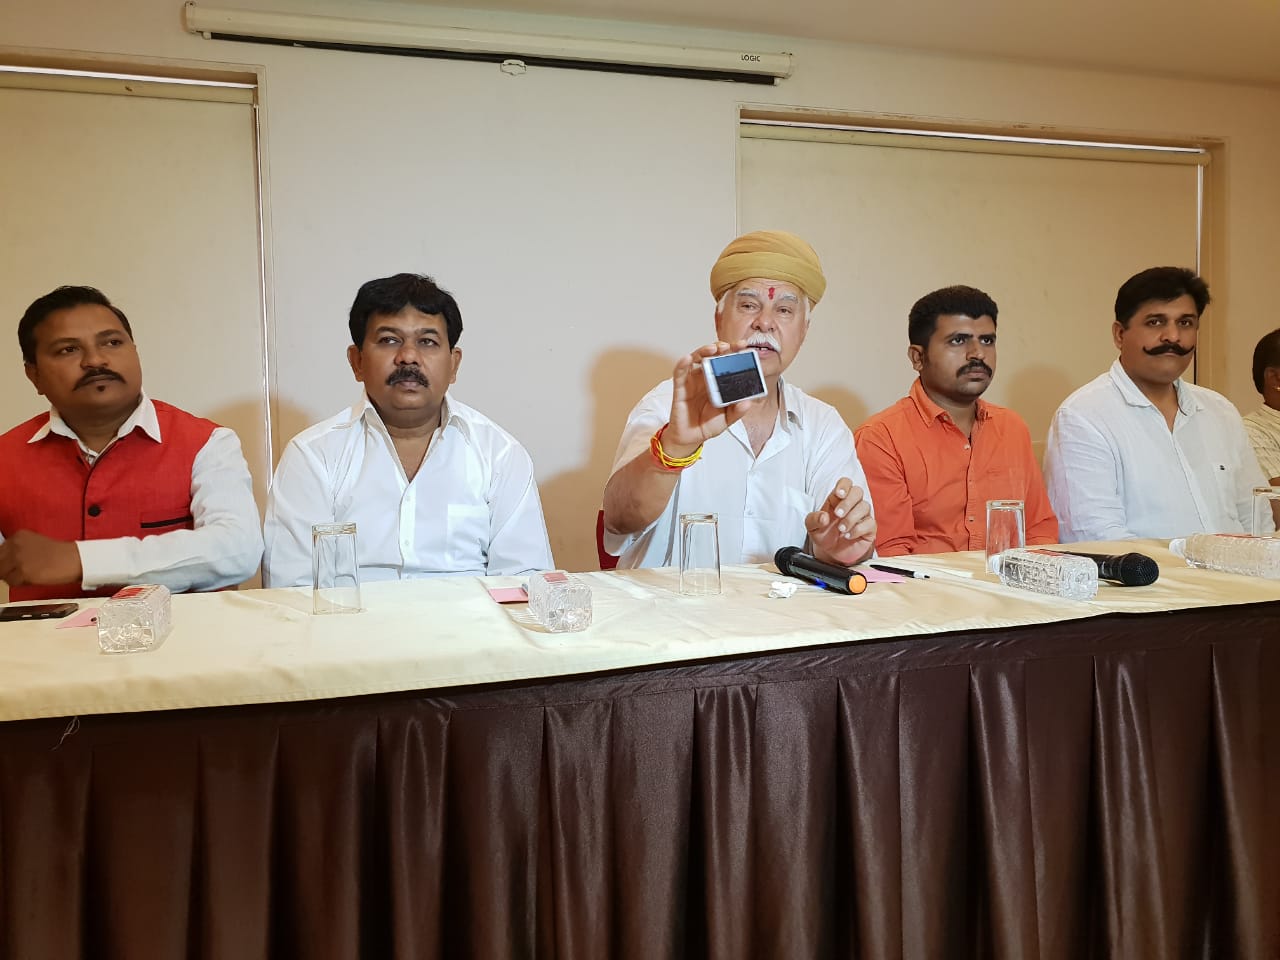 Shree Rajput Karni Sena will support the party listening to their demands